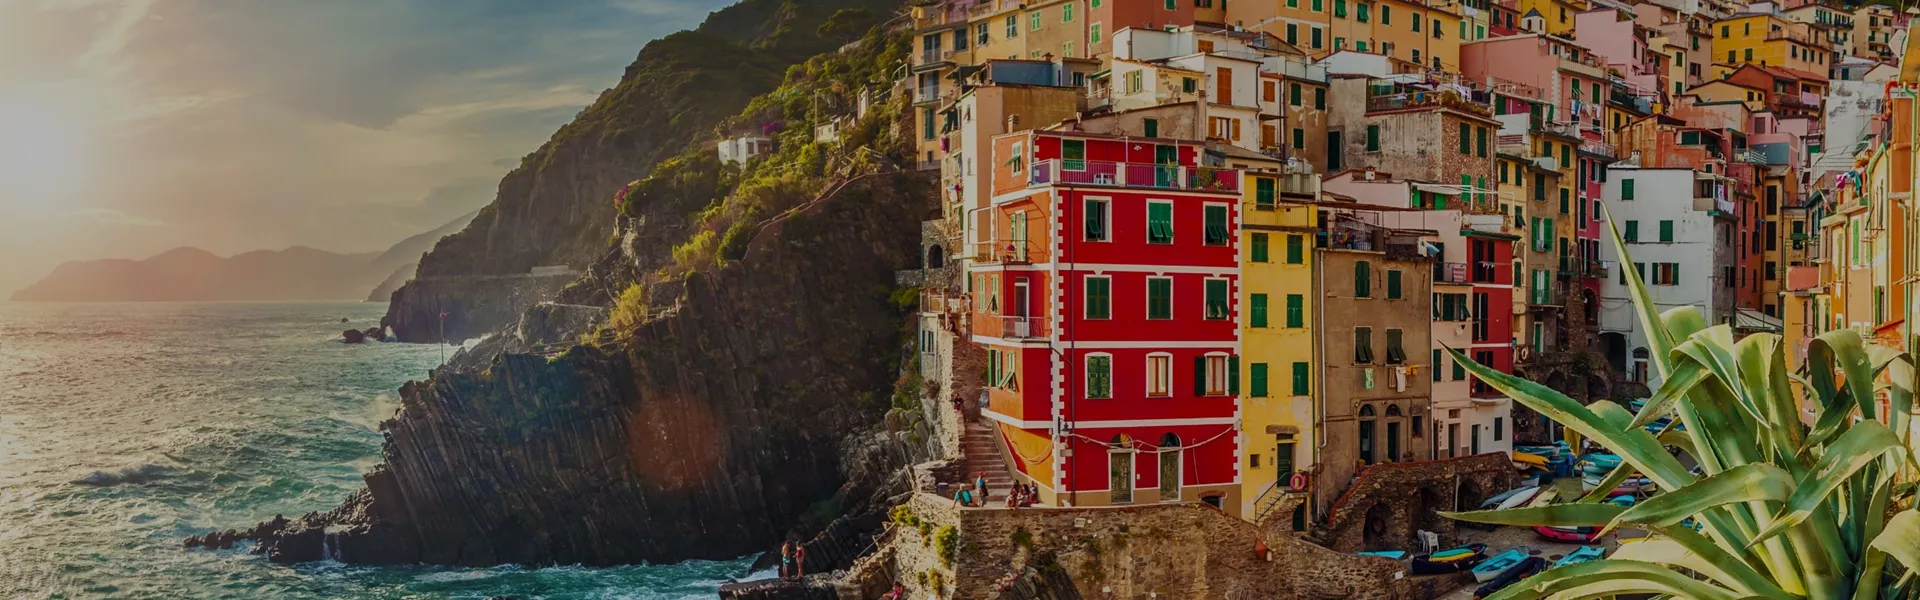 A scenic view of an Italian city by the sea